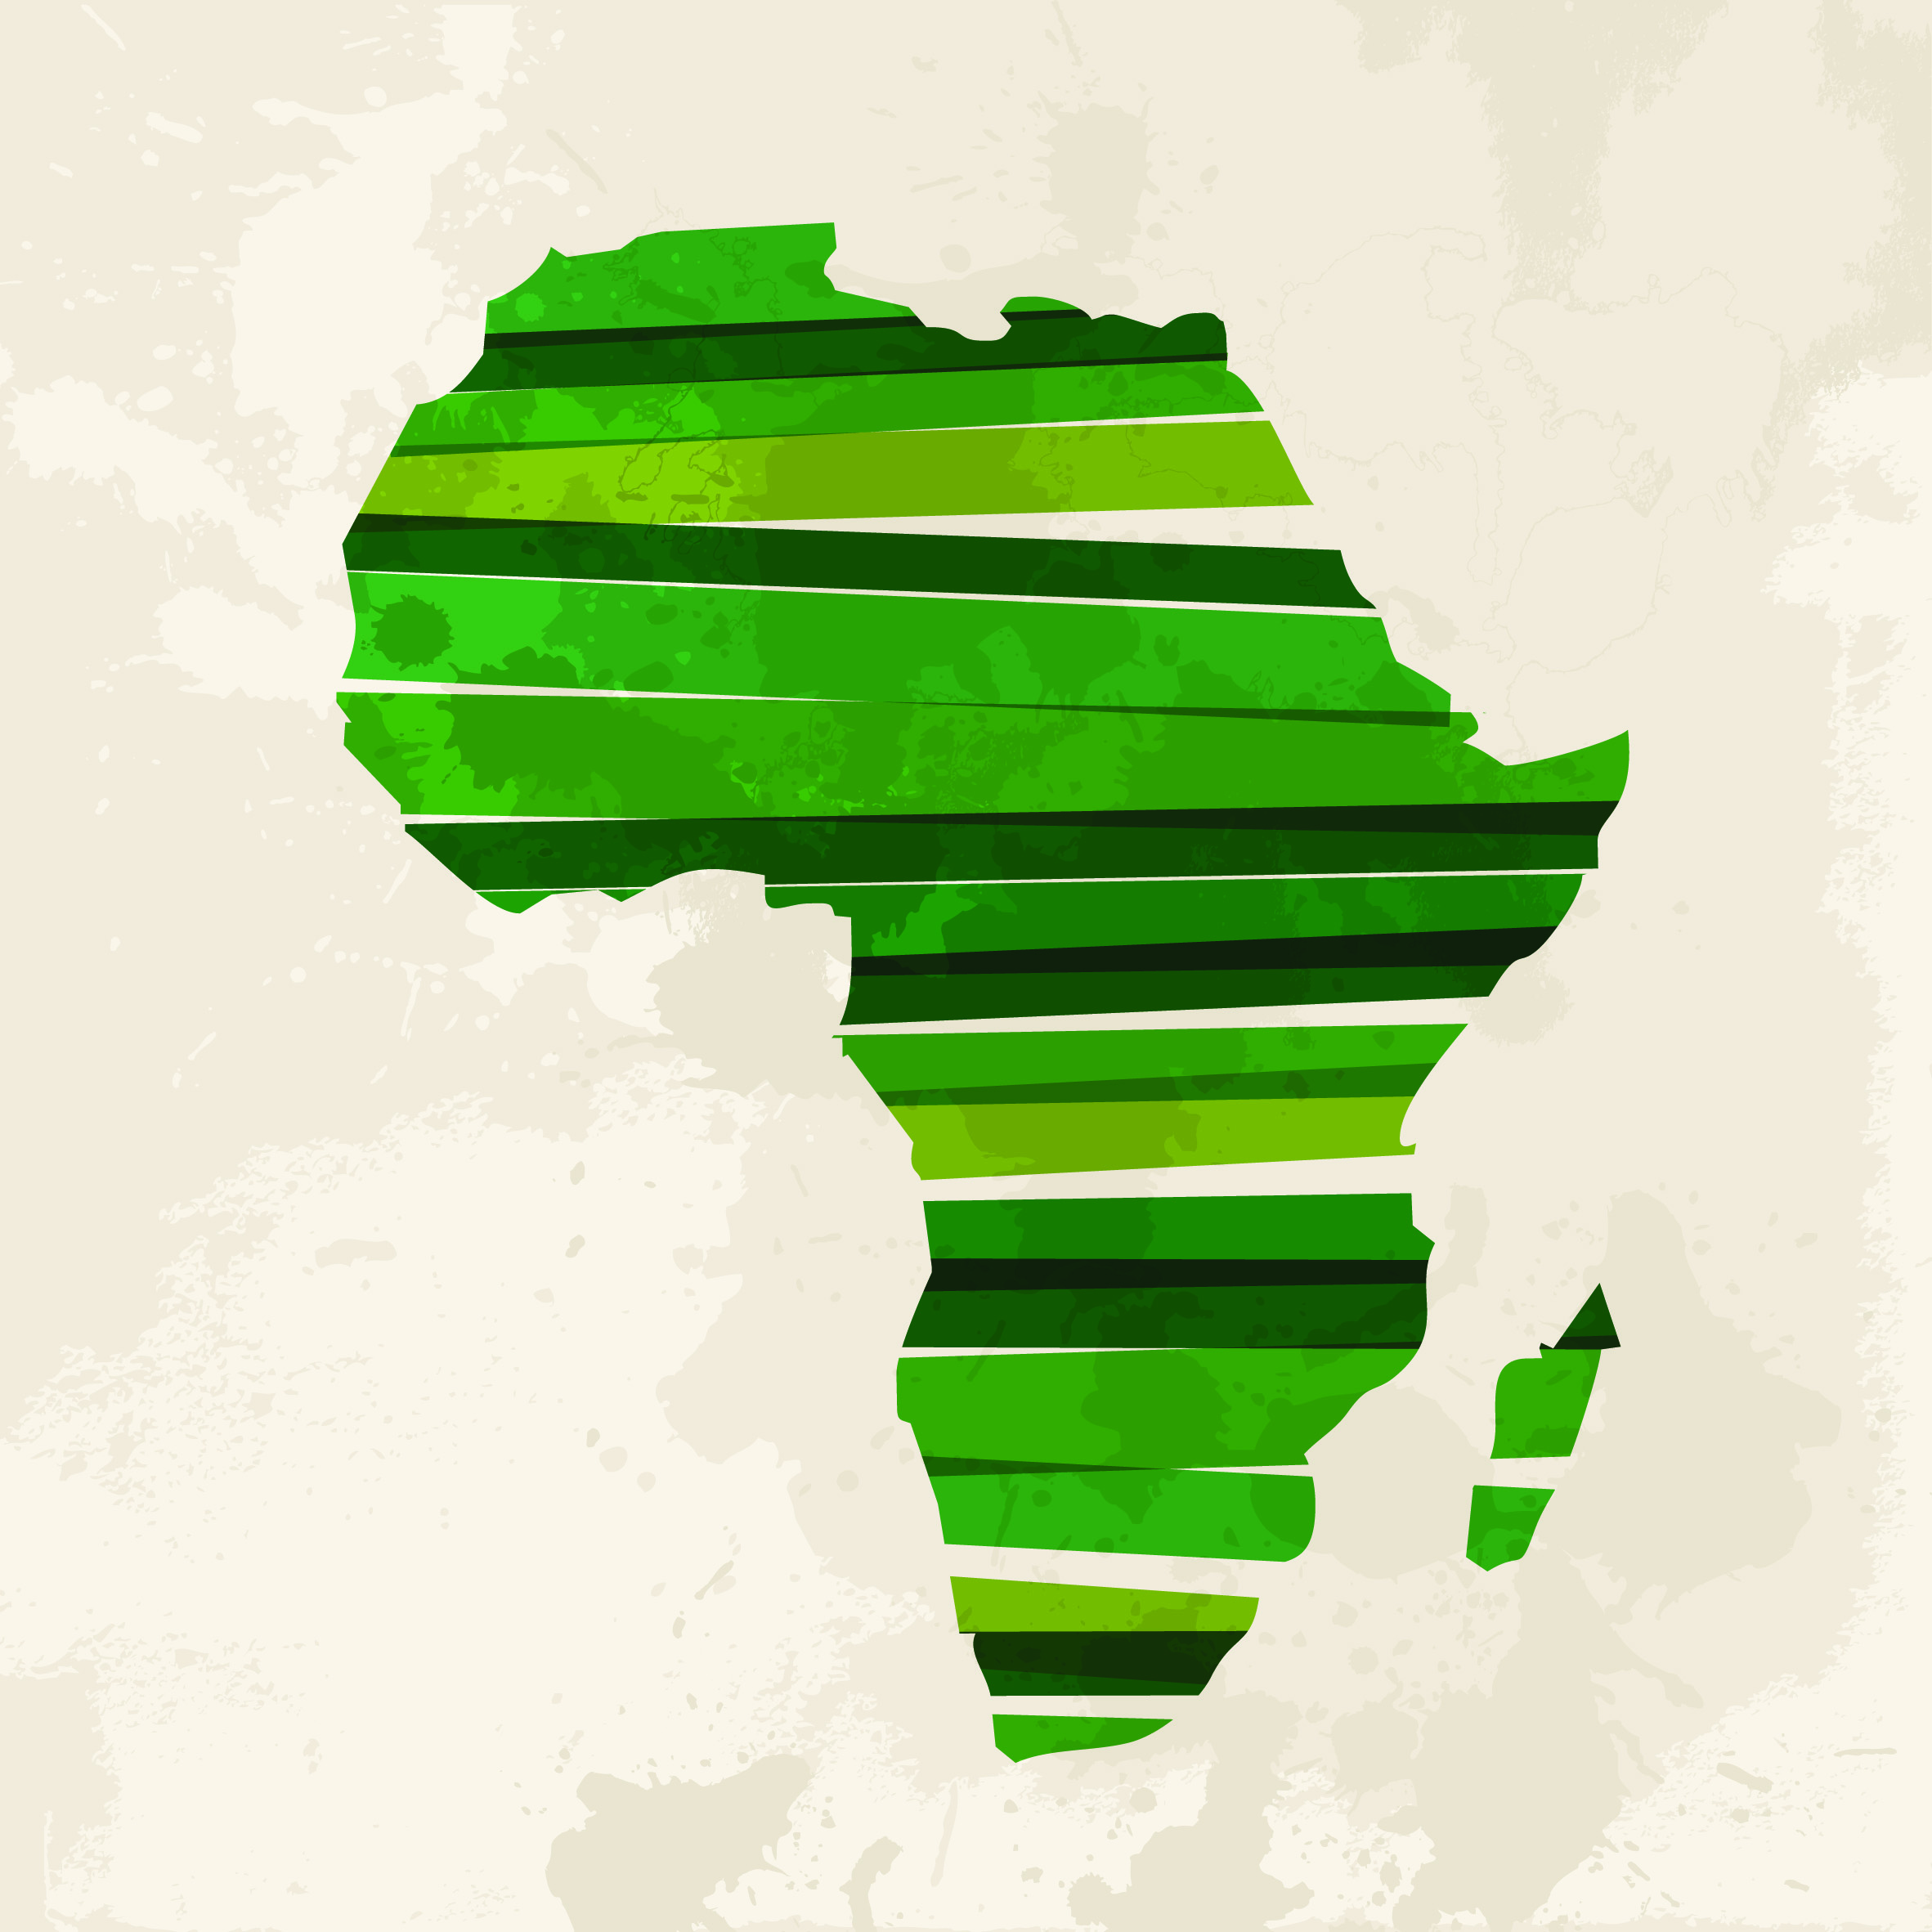 Africa, here and now